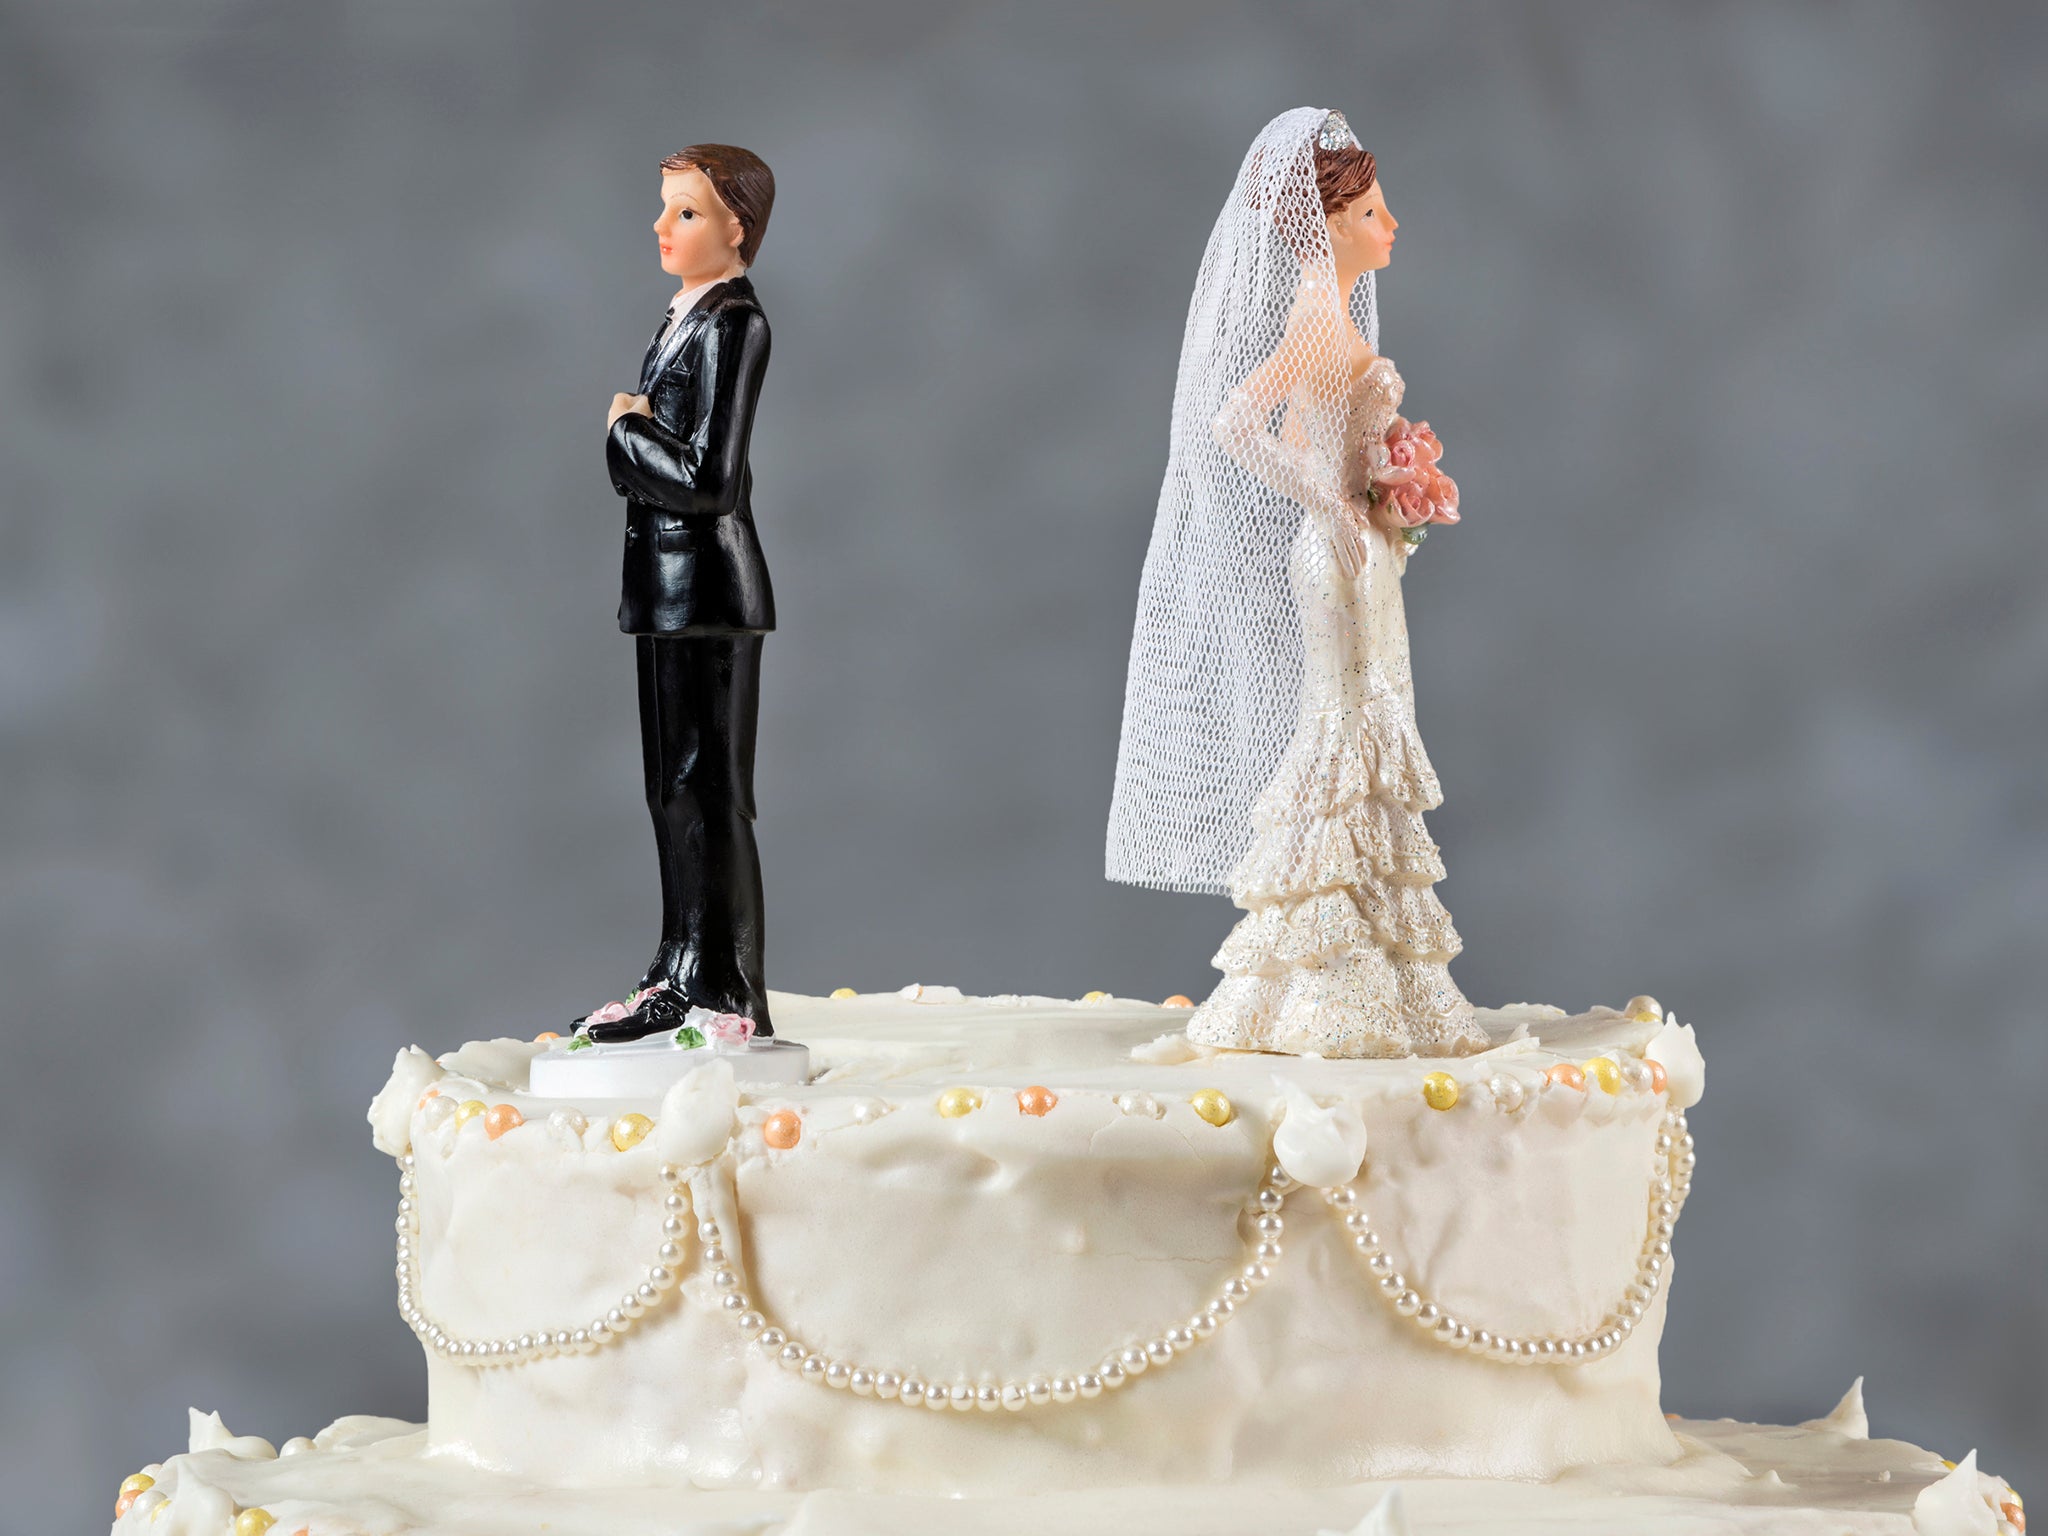 The couple had been married two hours before the husband asked for a divorce